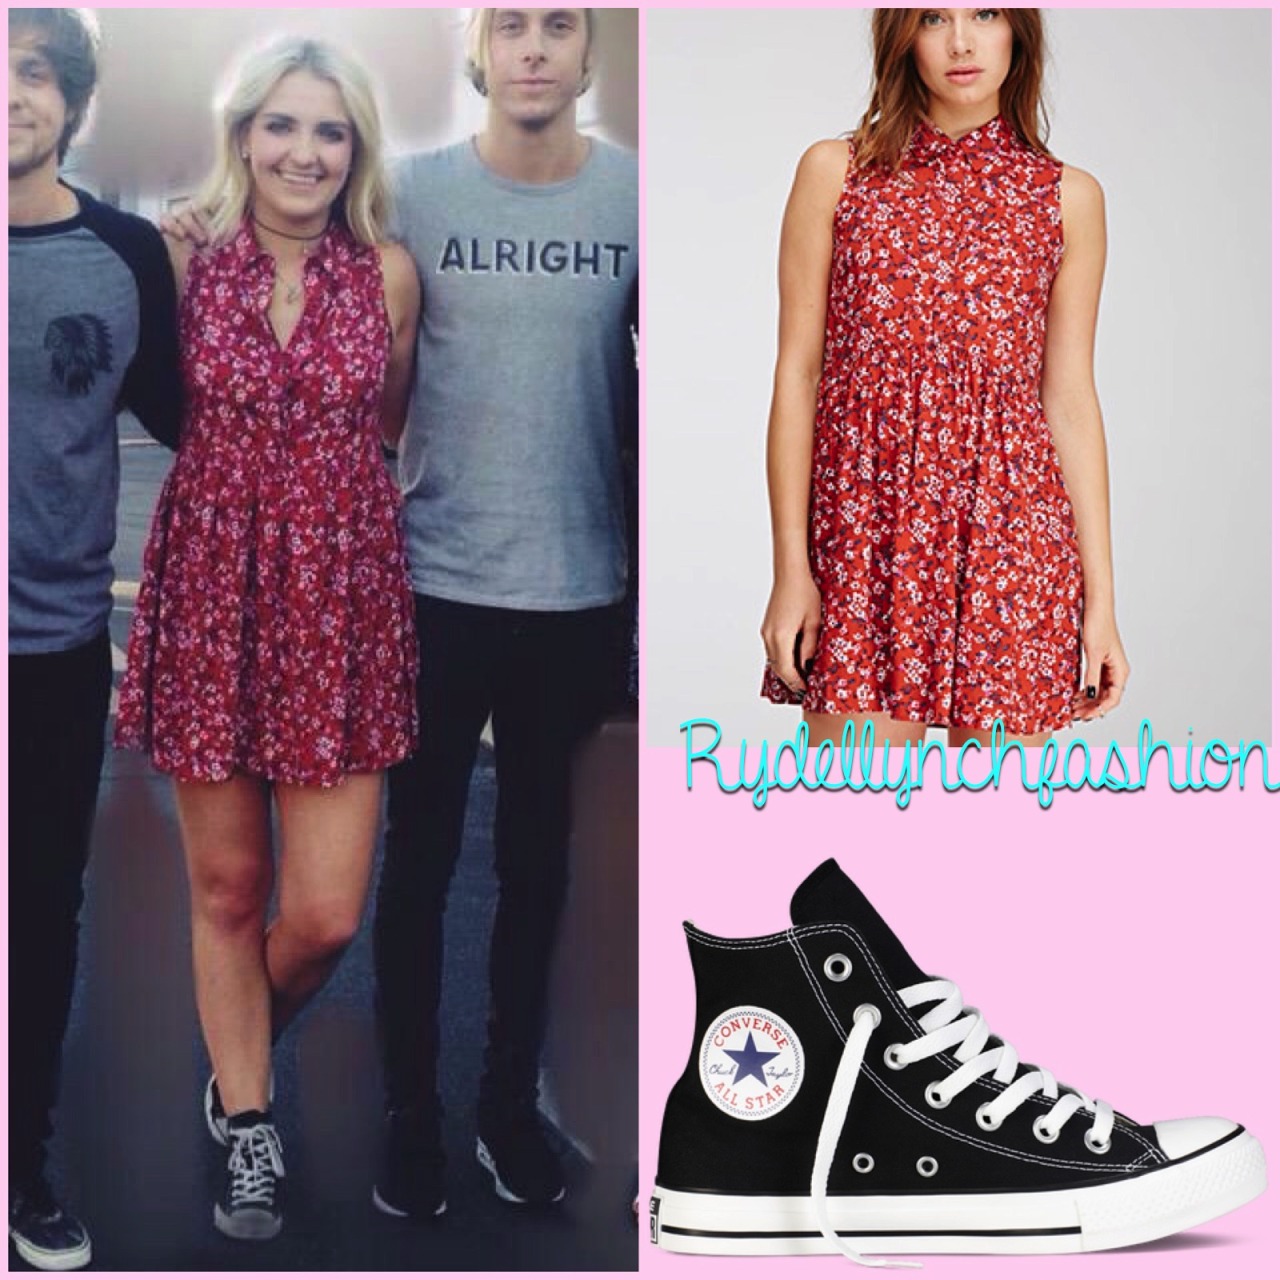 Rydel’s Outfit Worn with a Fan;
• Floral Print Shirt Dress (Exact) - Price: $15.90
• Chuck Taylor Classic Colors (Exact) - Price: $55.00
June 6, 2015